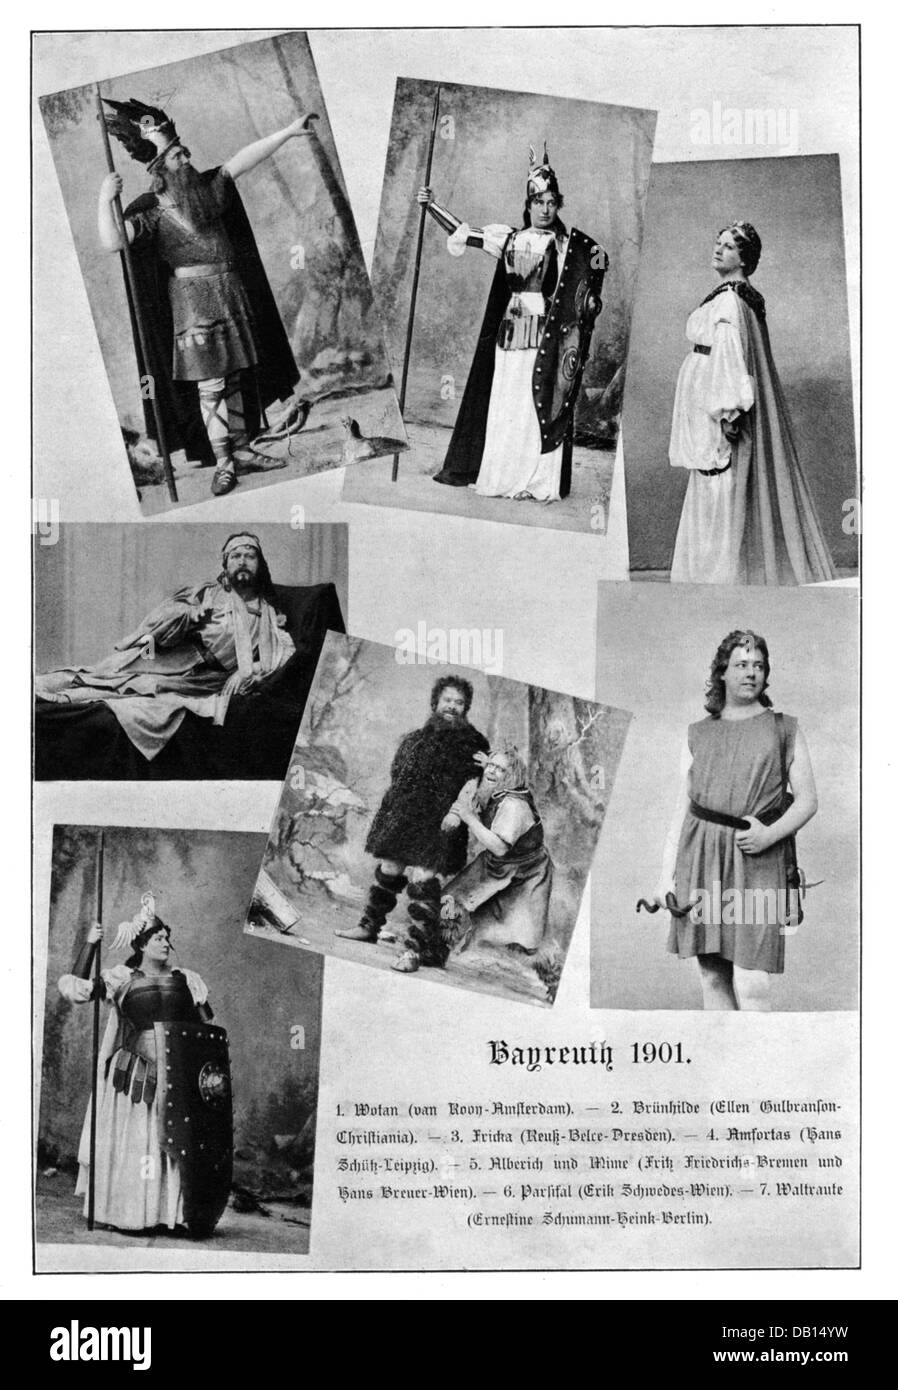 Wagner, Richard, 22.5.1813 - 13.2.1883, German composer, singers at the Bayreuth Festival, Bayreuth, 1901, Stock Photo